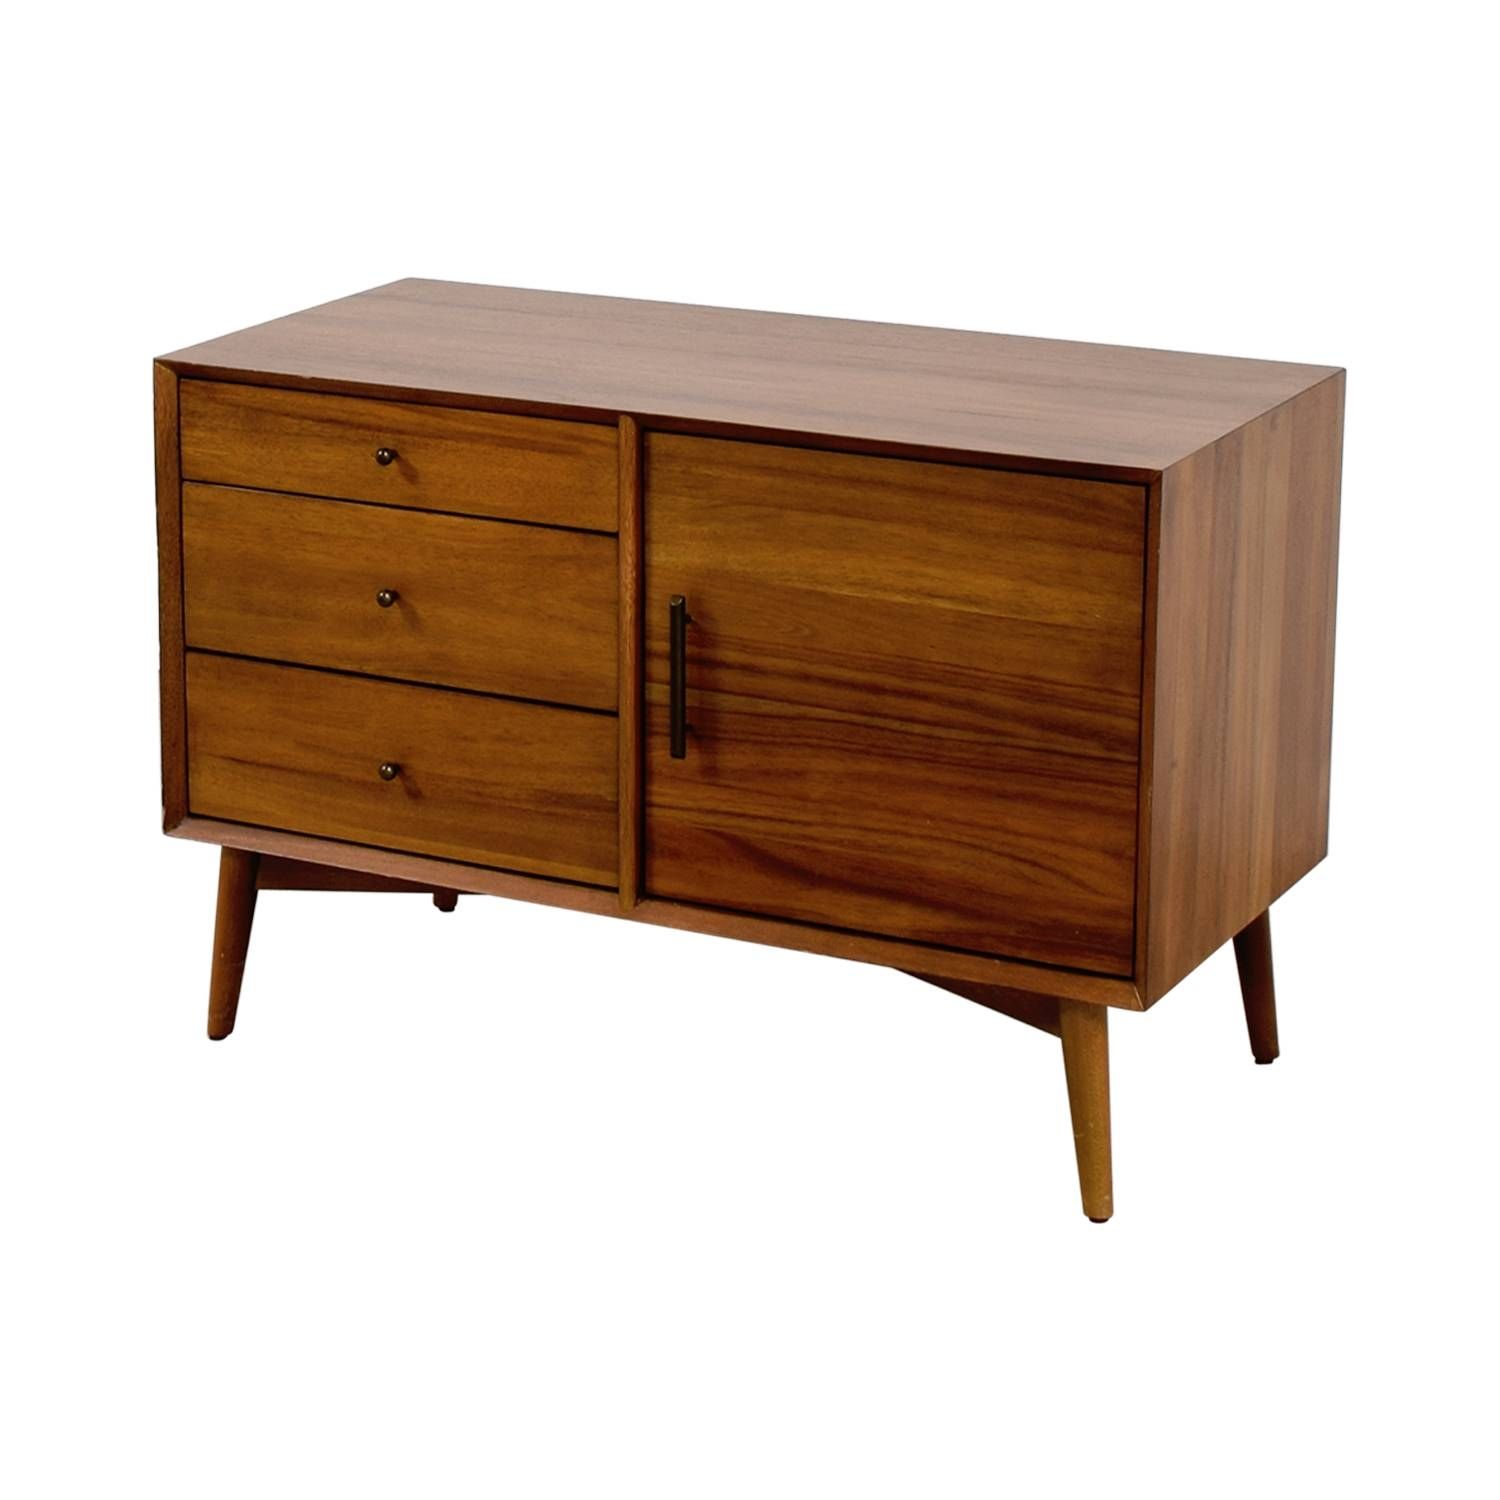 47% Off – West Elm West Elm Mid Century Media Console / Storage With Current West Elm Sideboards (View 10 of 15)